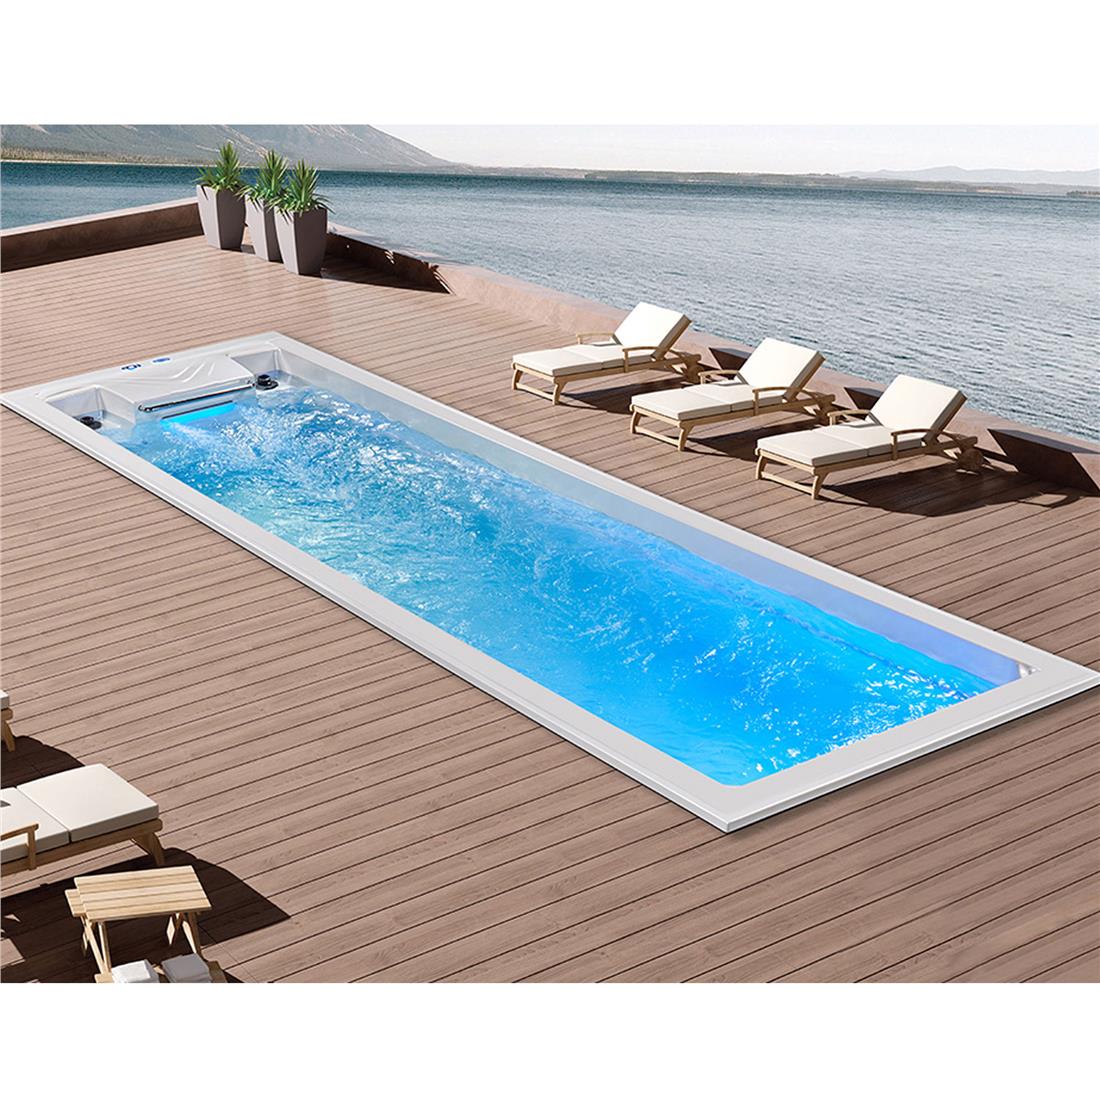 Underground Outdoor Indoor For Sale Home Garden Swim Jet Large Swimming Pool  HS-A9104